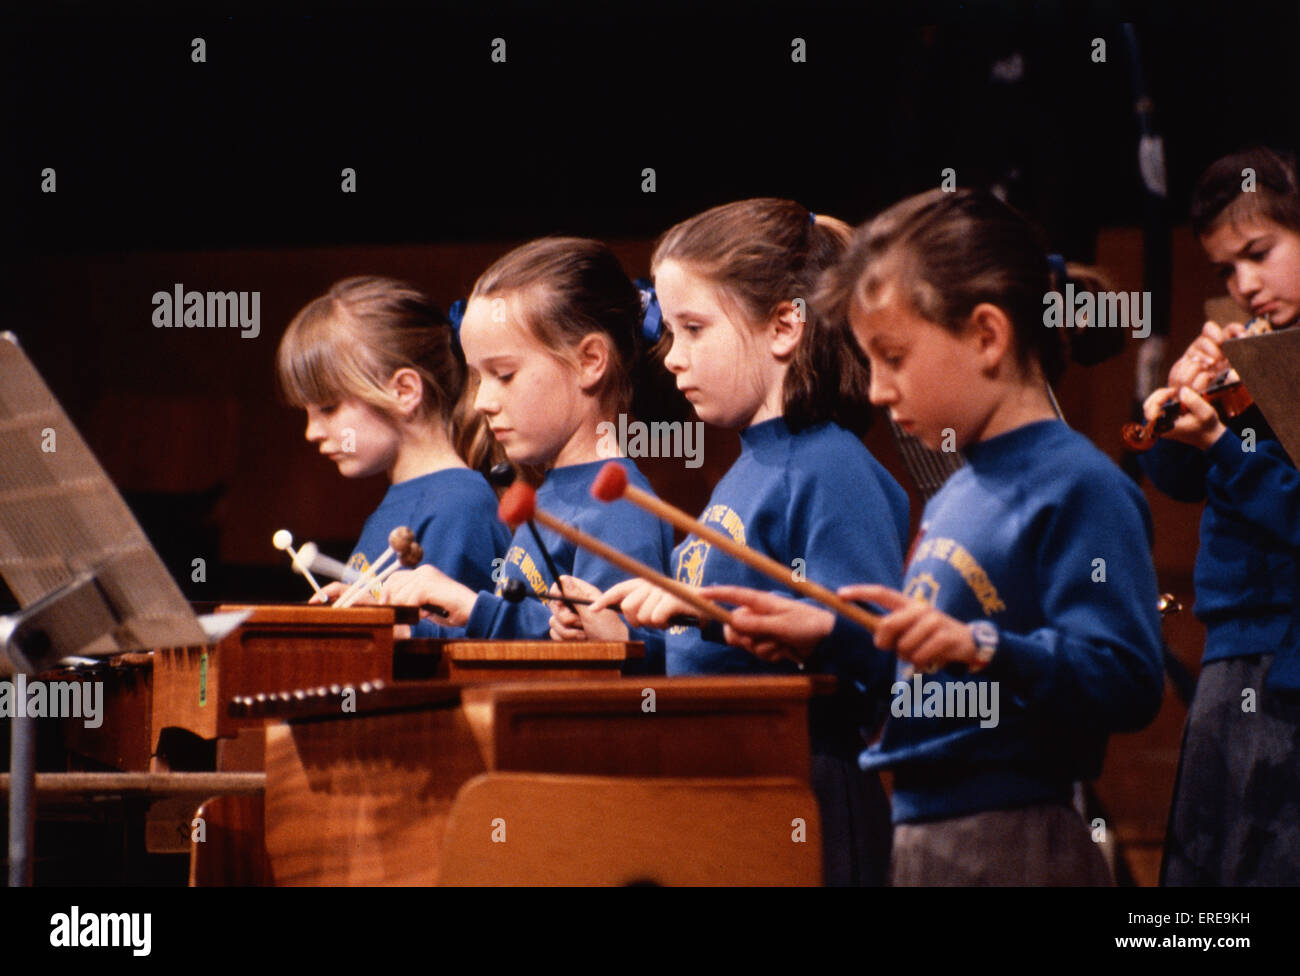 CHILDREN playing instruments Children's Orchestra.   Playing Xylophone Stock Photo